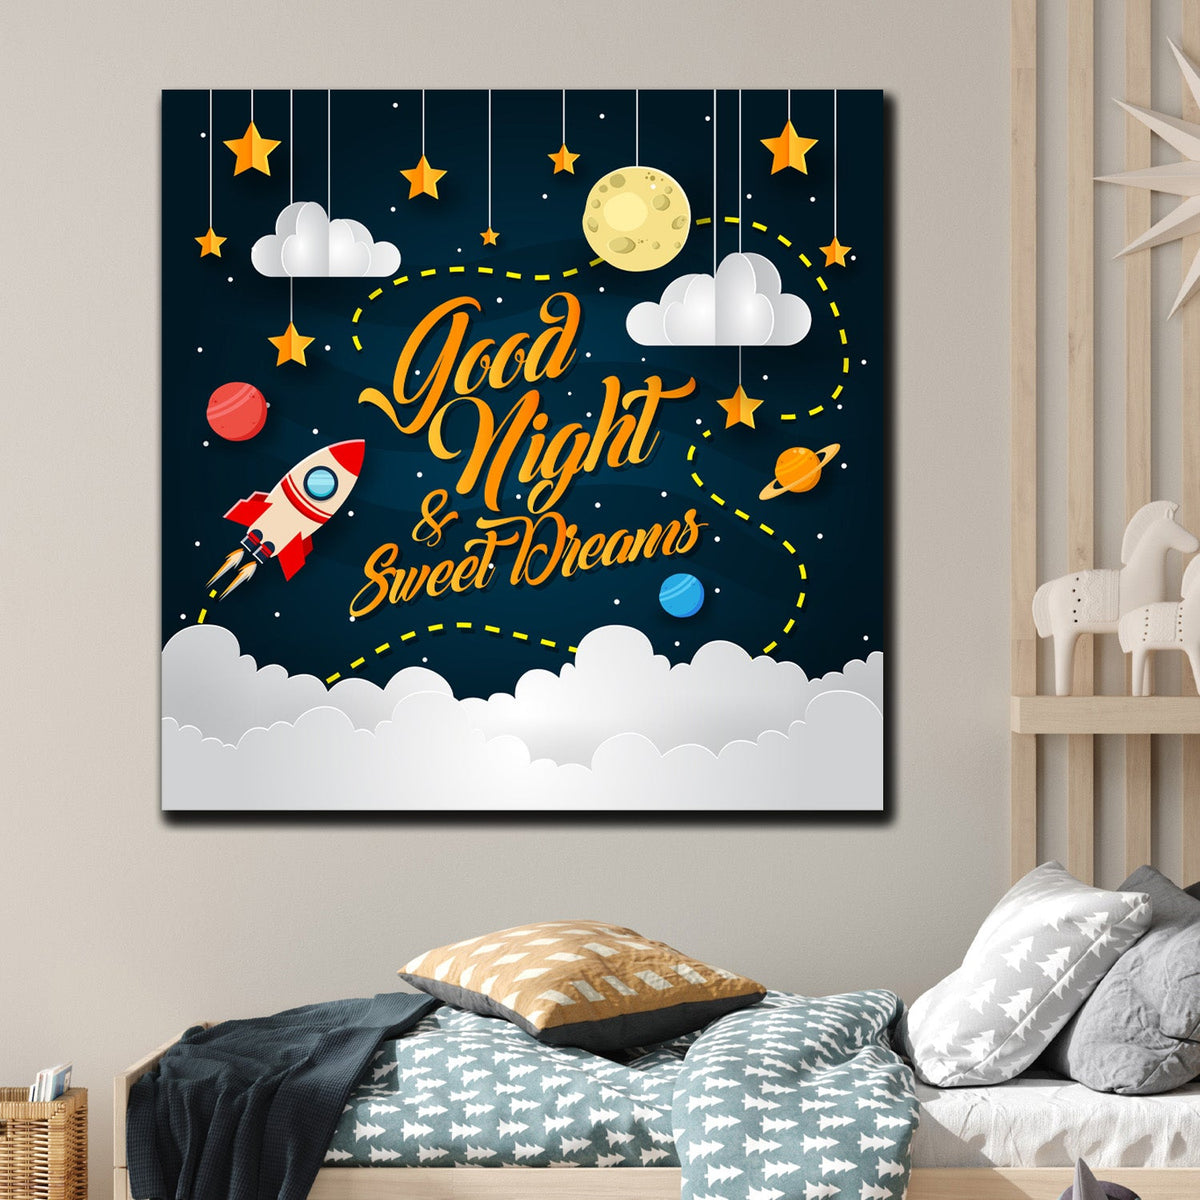 https://cdn.shopify.com/s/files/1/0387/9986/8044/products/GoodNight_SweetDreamsCanvasArtprintStretched-2.jpg